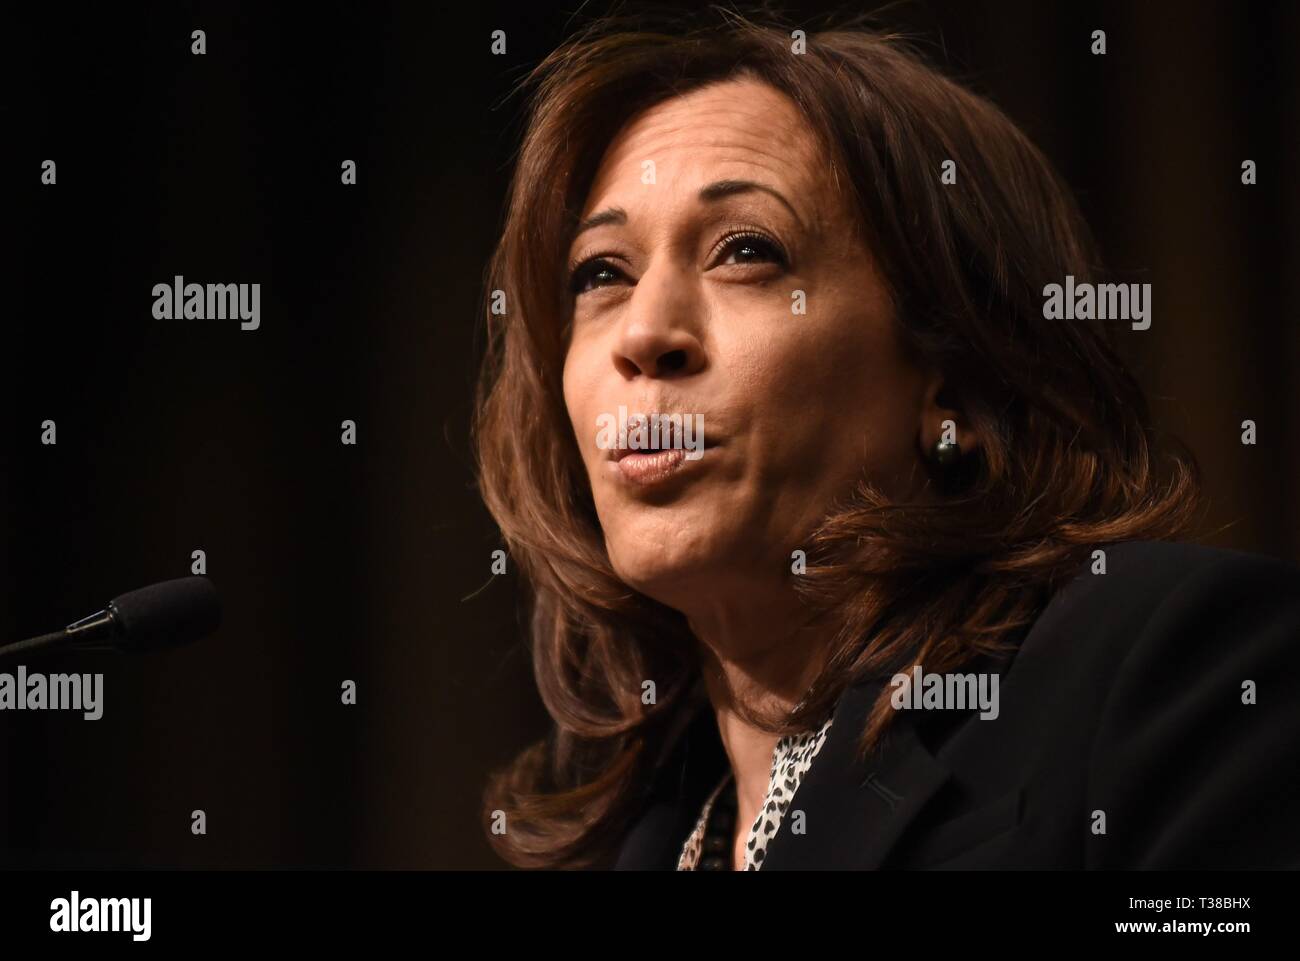 New York, NY, USA. 5th Apr, 2019. Kamala Harris in attendance for National Action Network (NAN) 2019 Convention - FRI, Sheraton New York Times Square Hotel, New York, NY April 5, 2019. Credit: Kristin Callahan/Everett Collection/Alamy Live News Stock Photo